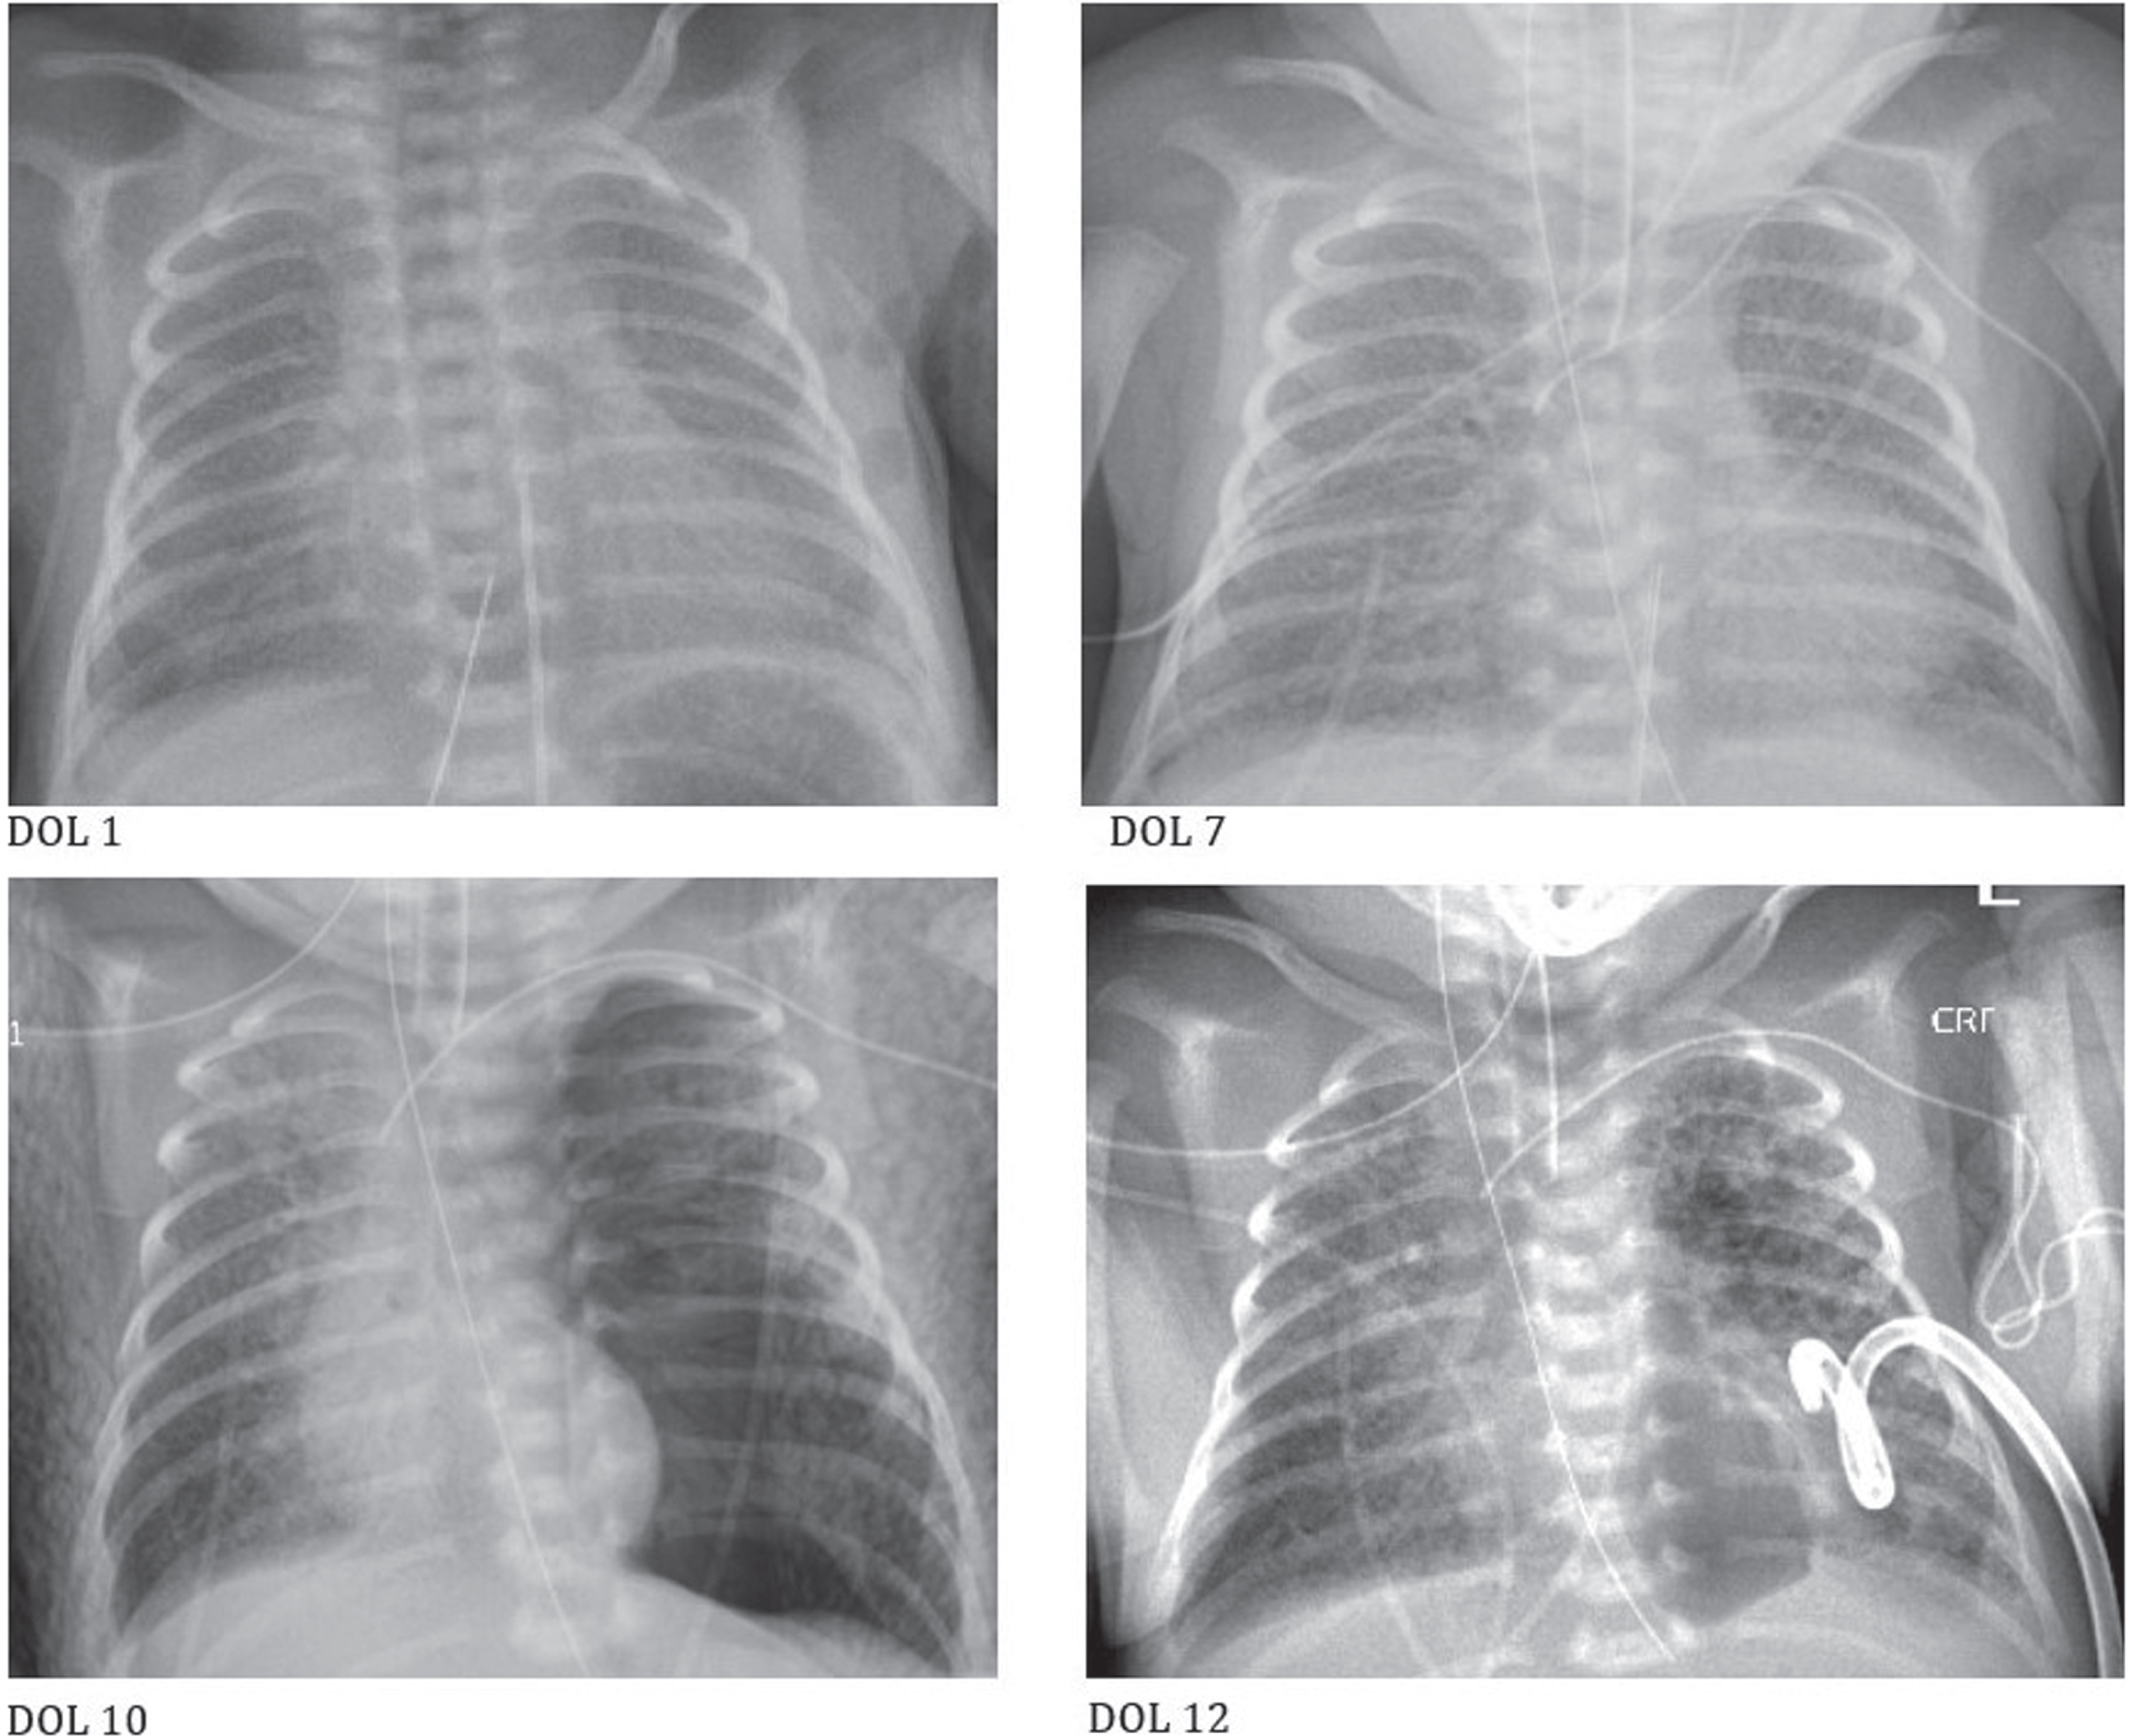 Progression of chest radiographs over first twelve days of life (DOL).